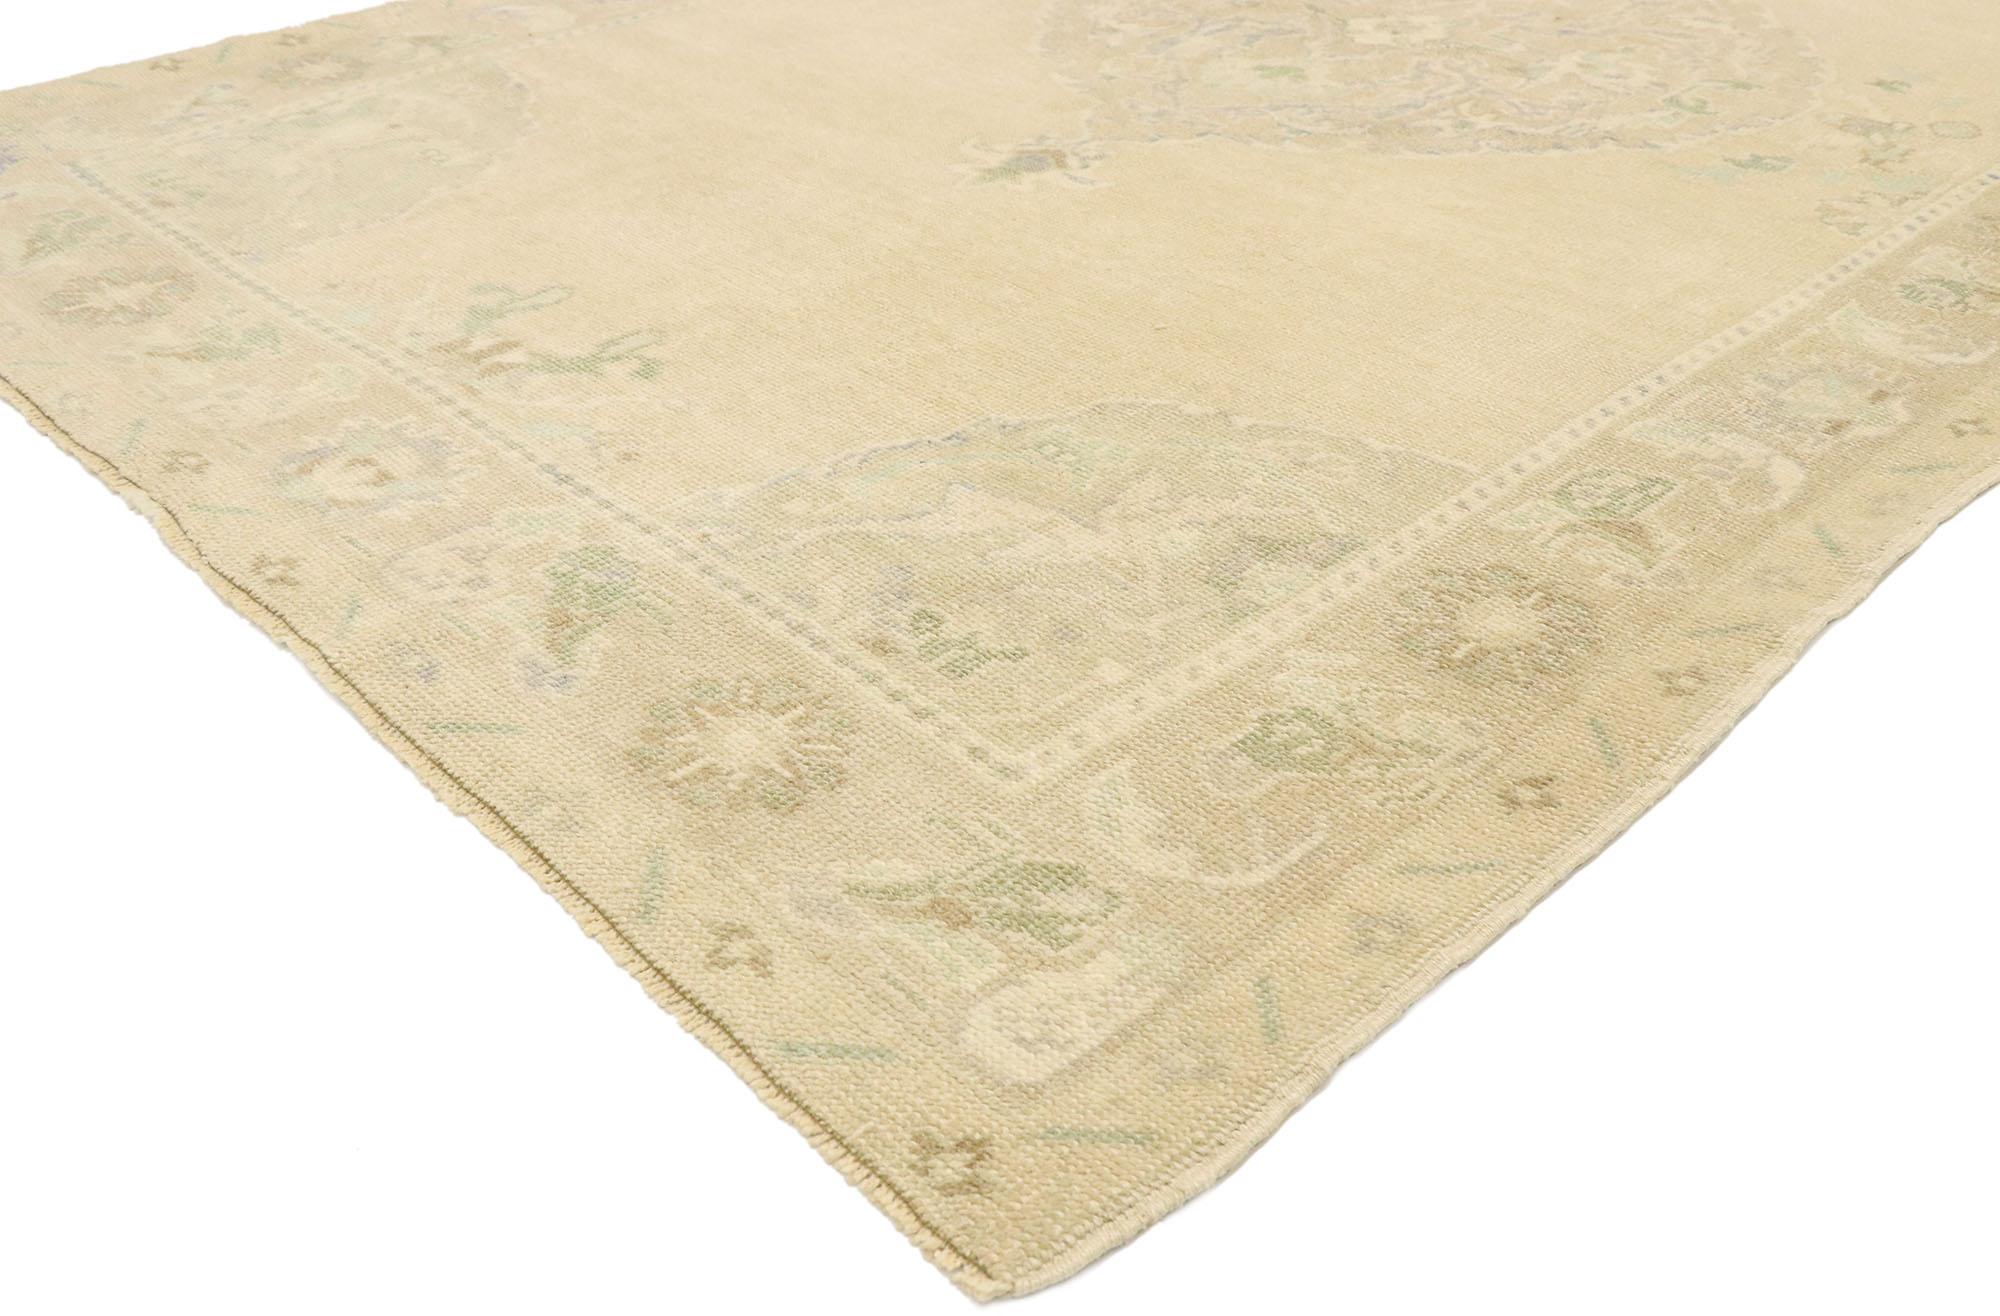 52961, vintage Turkish Oushak accent rug with French Renaissance Chateau style 04'09 x 07'05. Quiet luxurious beauty and soft, bespoke vibes meet rustic sensibility with a French Country chateau style in this hand knotted wool vintage Turkish Oushak